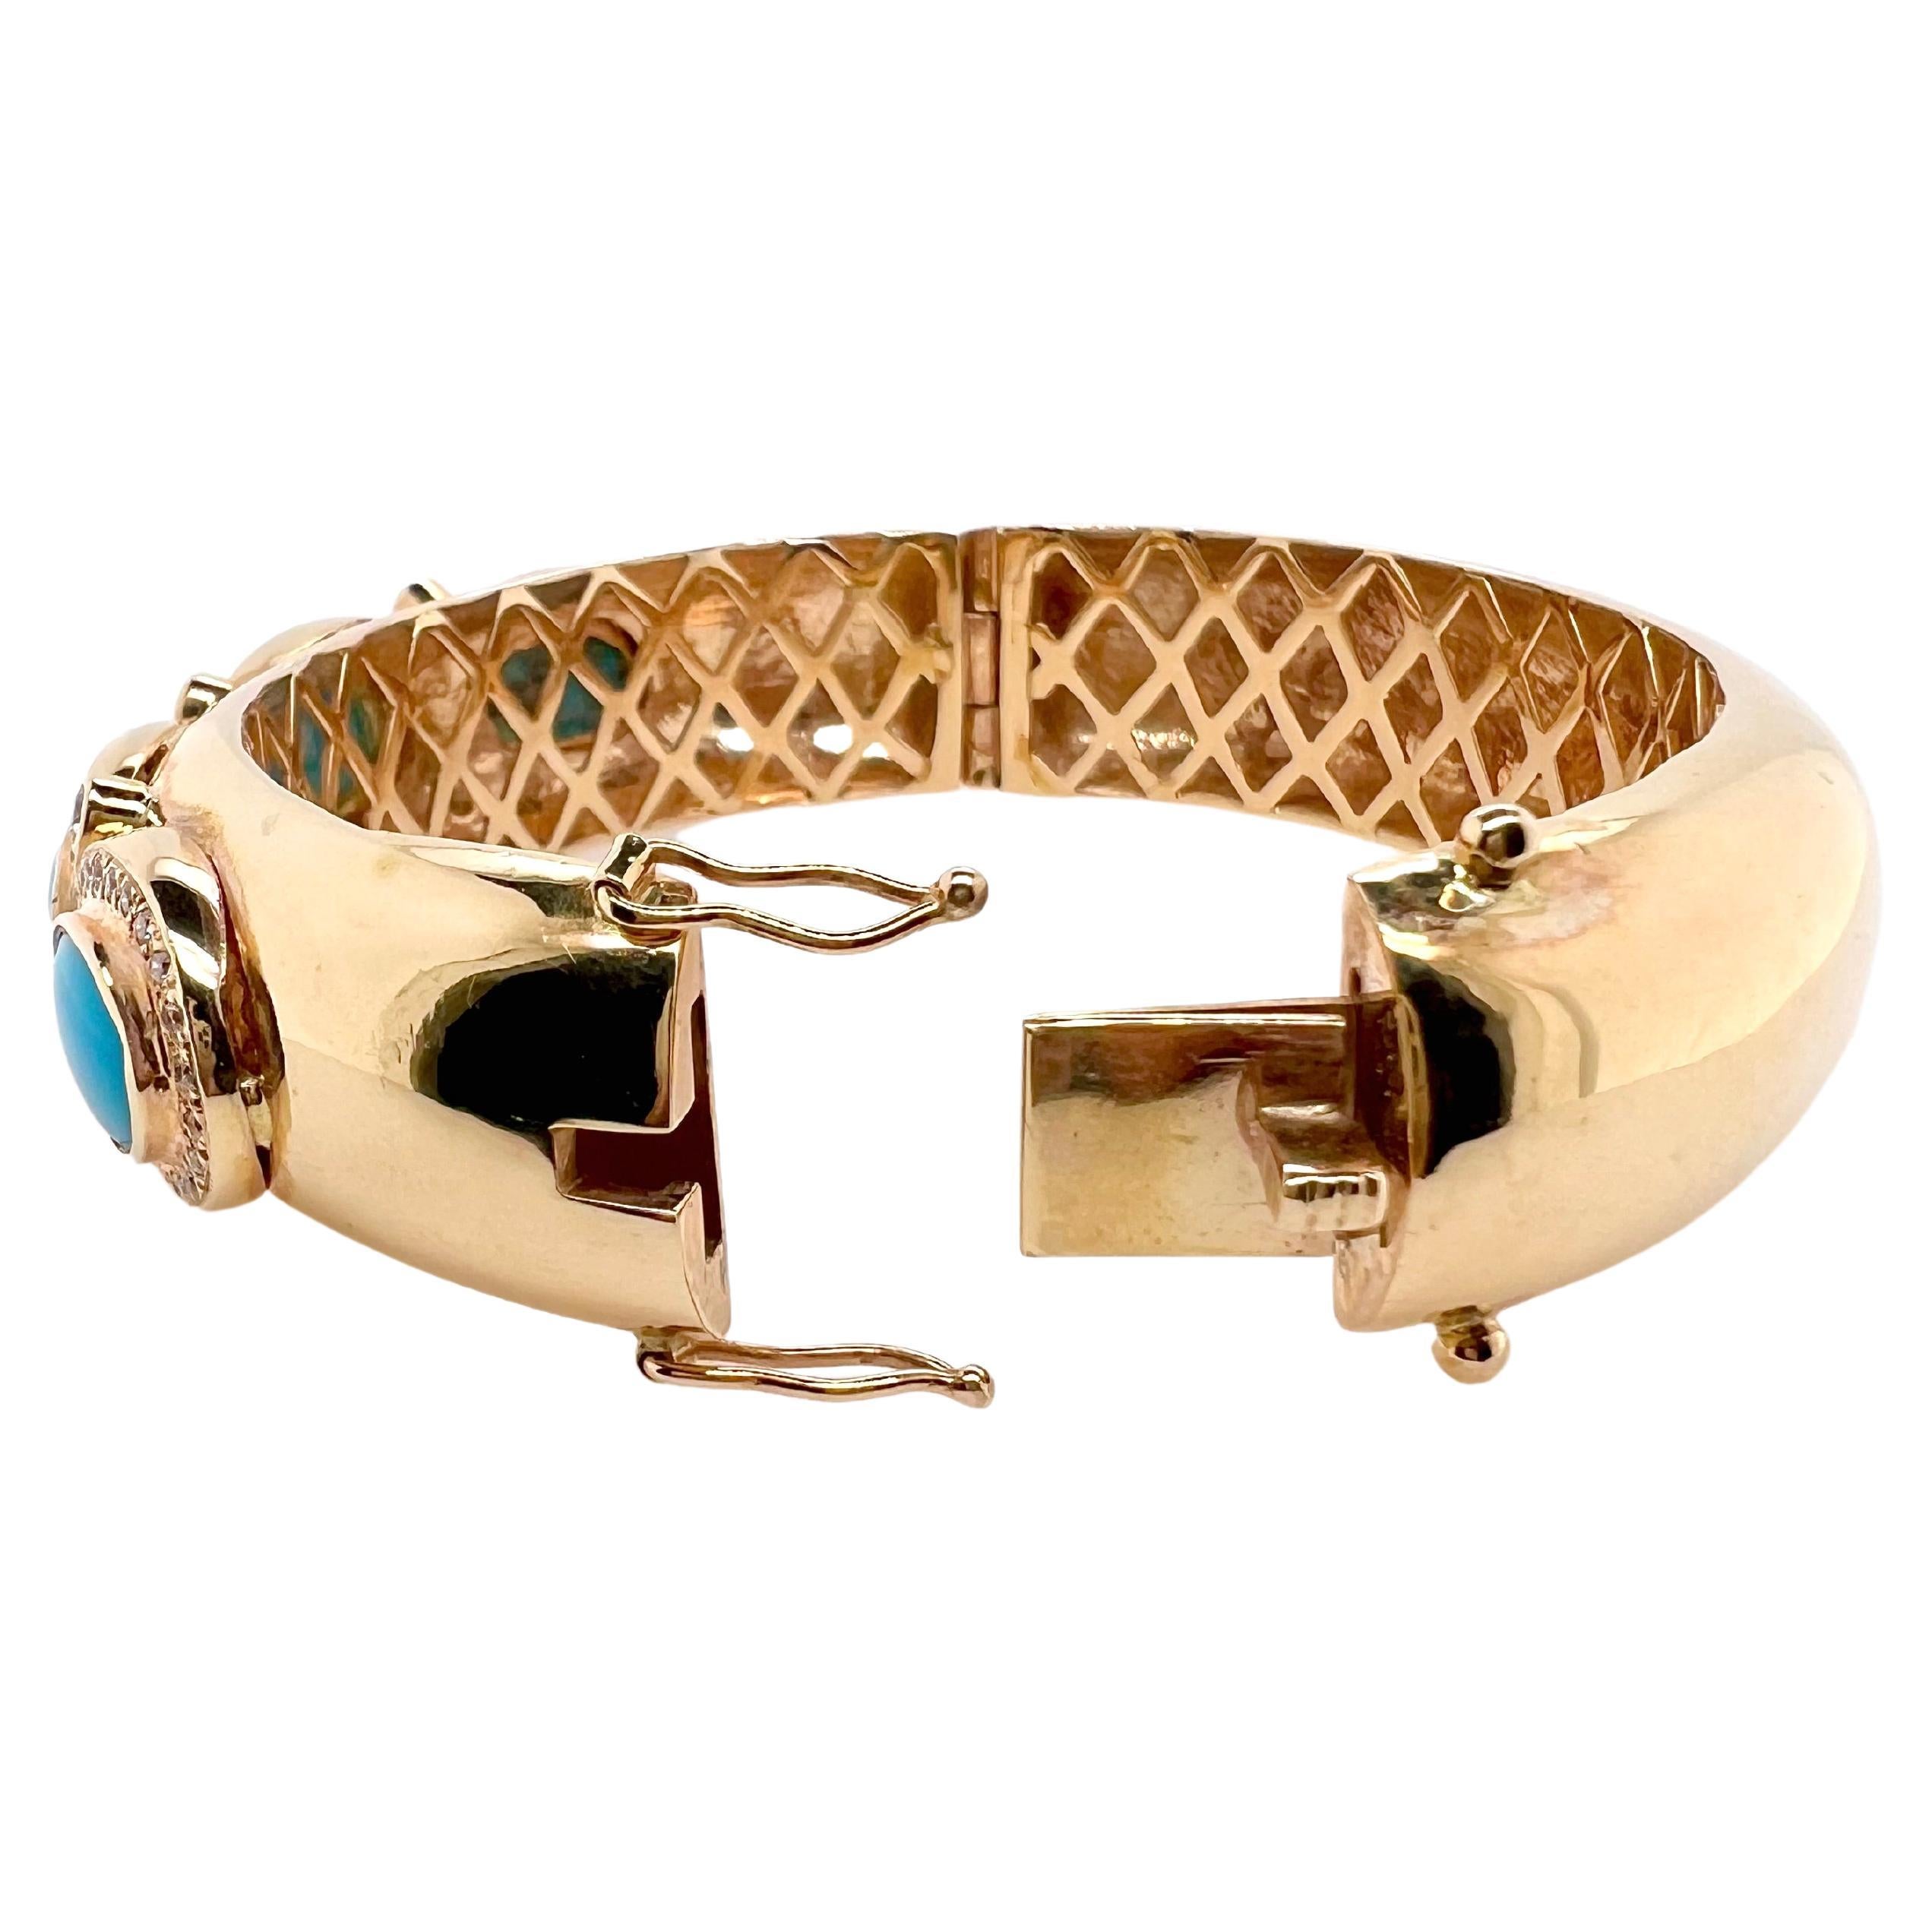 This stunning bangle is handmade with meticulous details.  The sleeping beauty turquoise are bezel set with round brilliant diamonds surrounding it.  The vibrant turquoise stands out agains the yellow gold and the bangle has an underneath gallery to